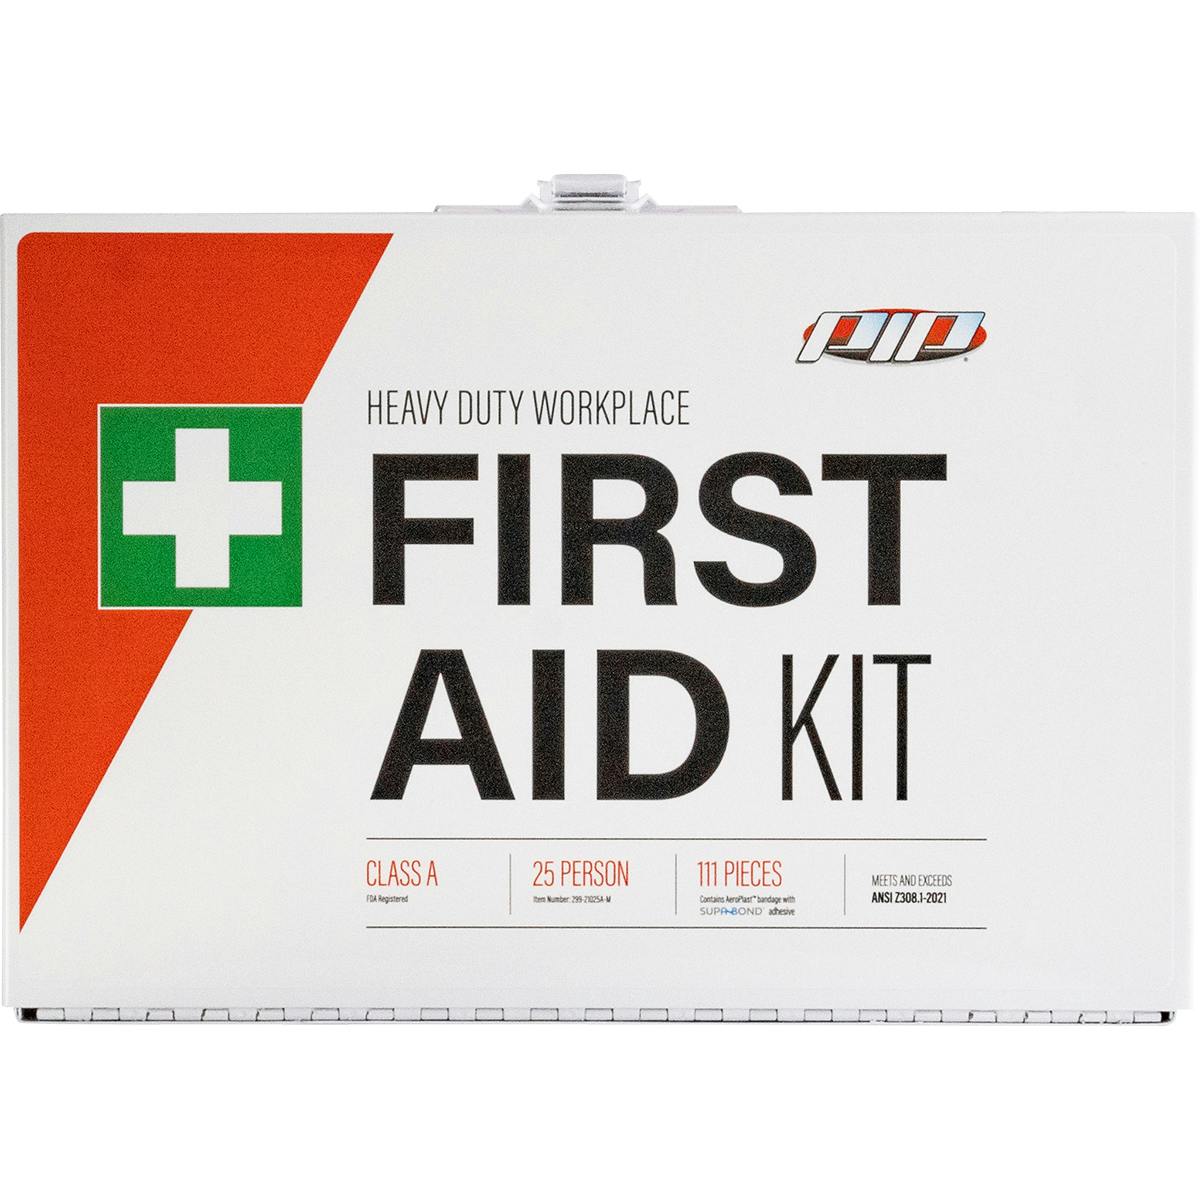 ANSI Class A Waterproof First Aid Kit - 25 Person, White (299-21025A-M) - KIT_1